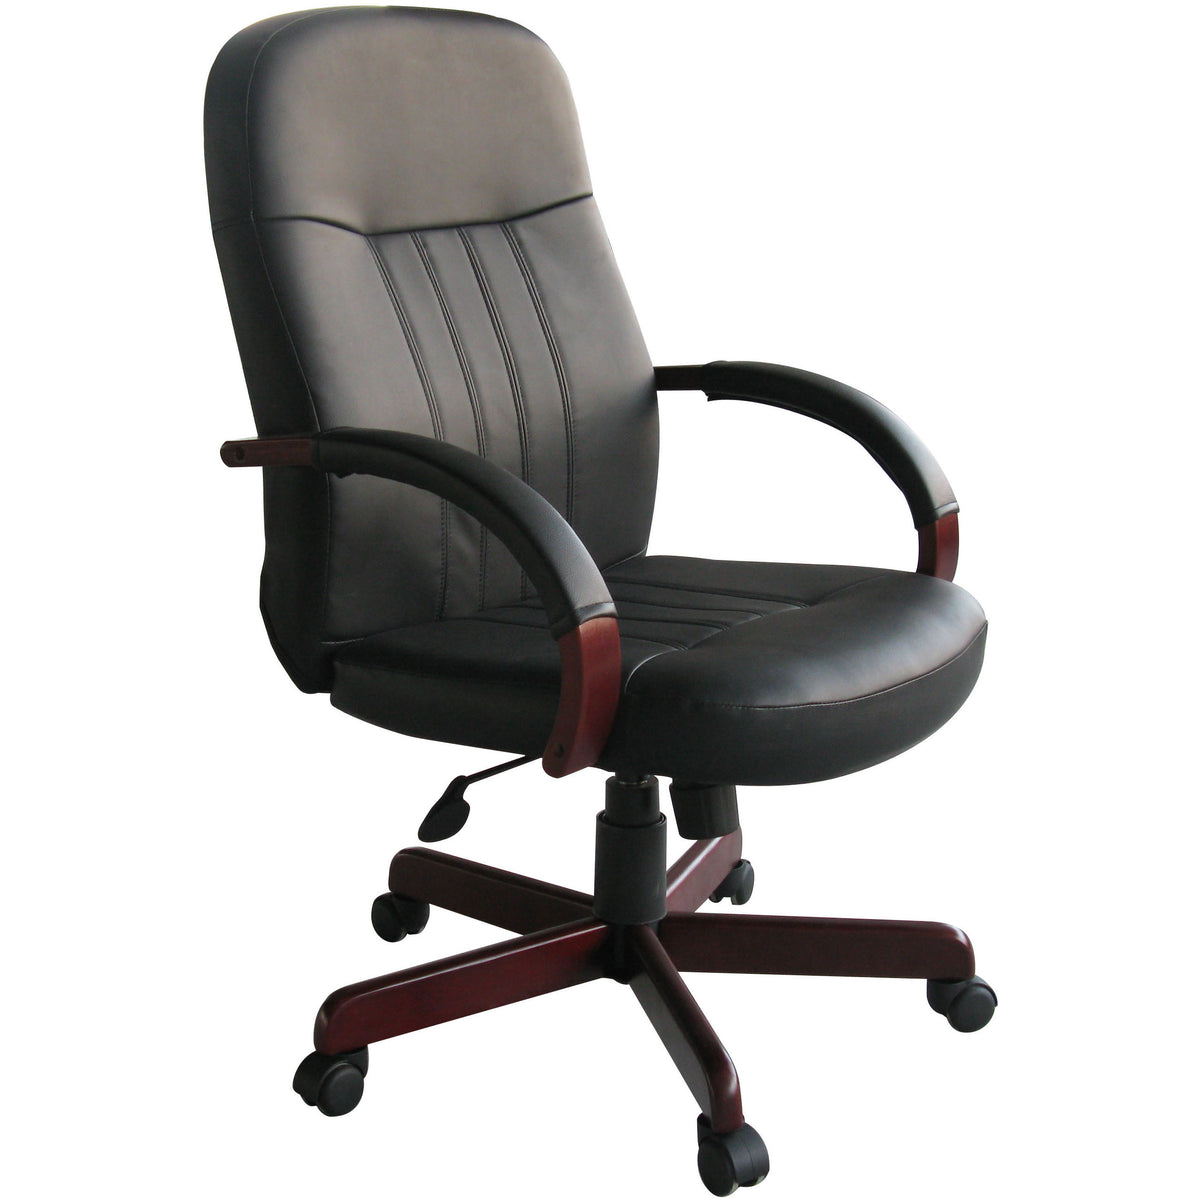 LeatherPlus Exec. Chair with Mahogany Finish, B8376-M